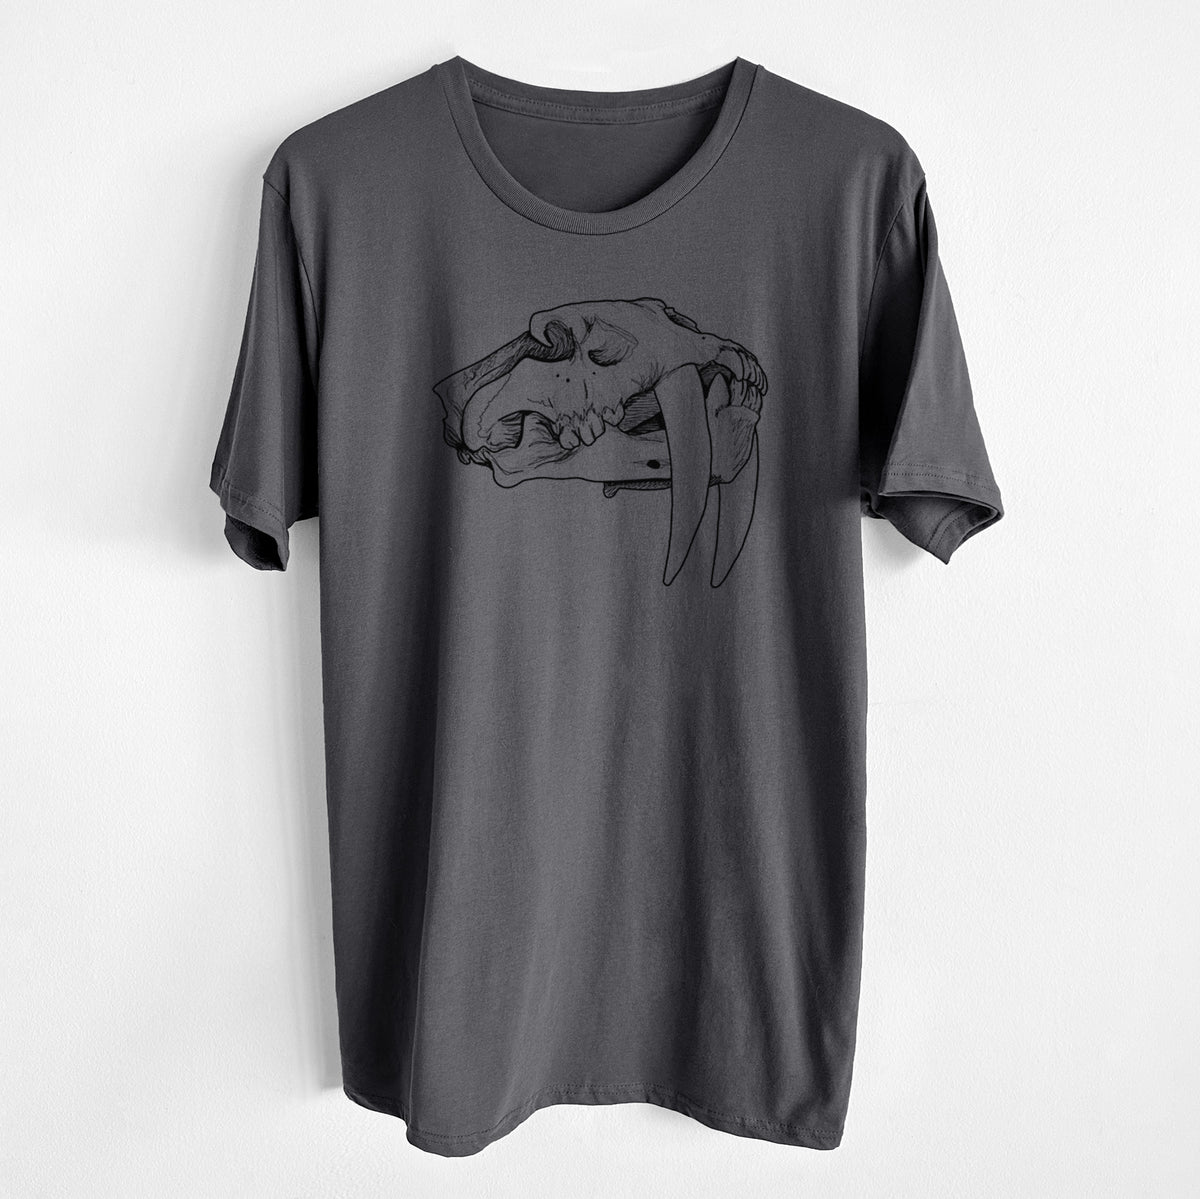 Saber-toothed Tiger Skull - Unisex Crewneck - Made in USA - 100% Organic Cotton